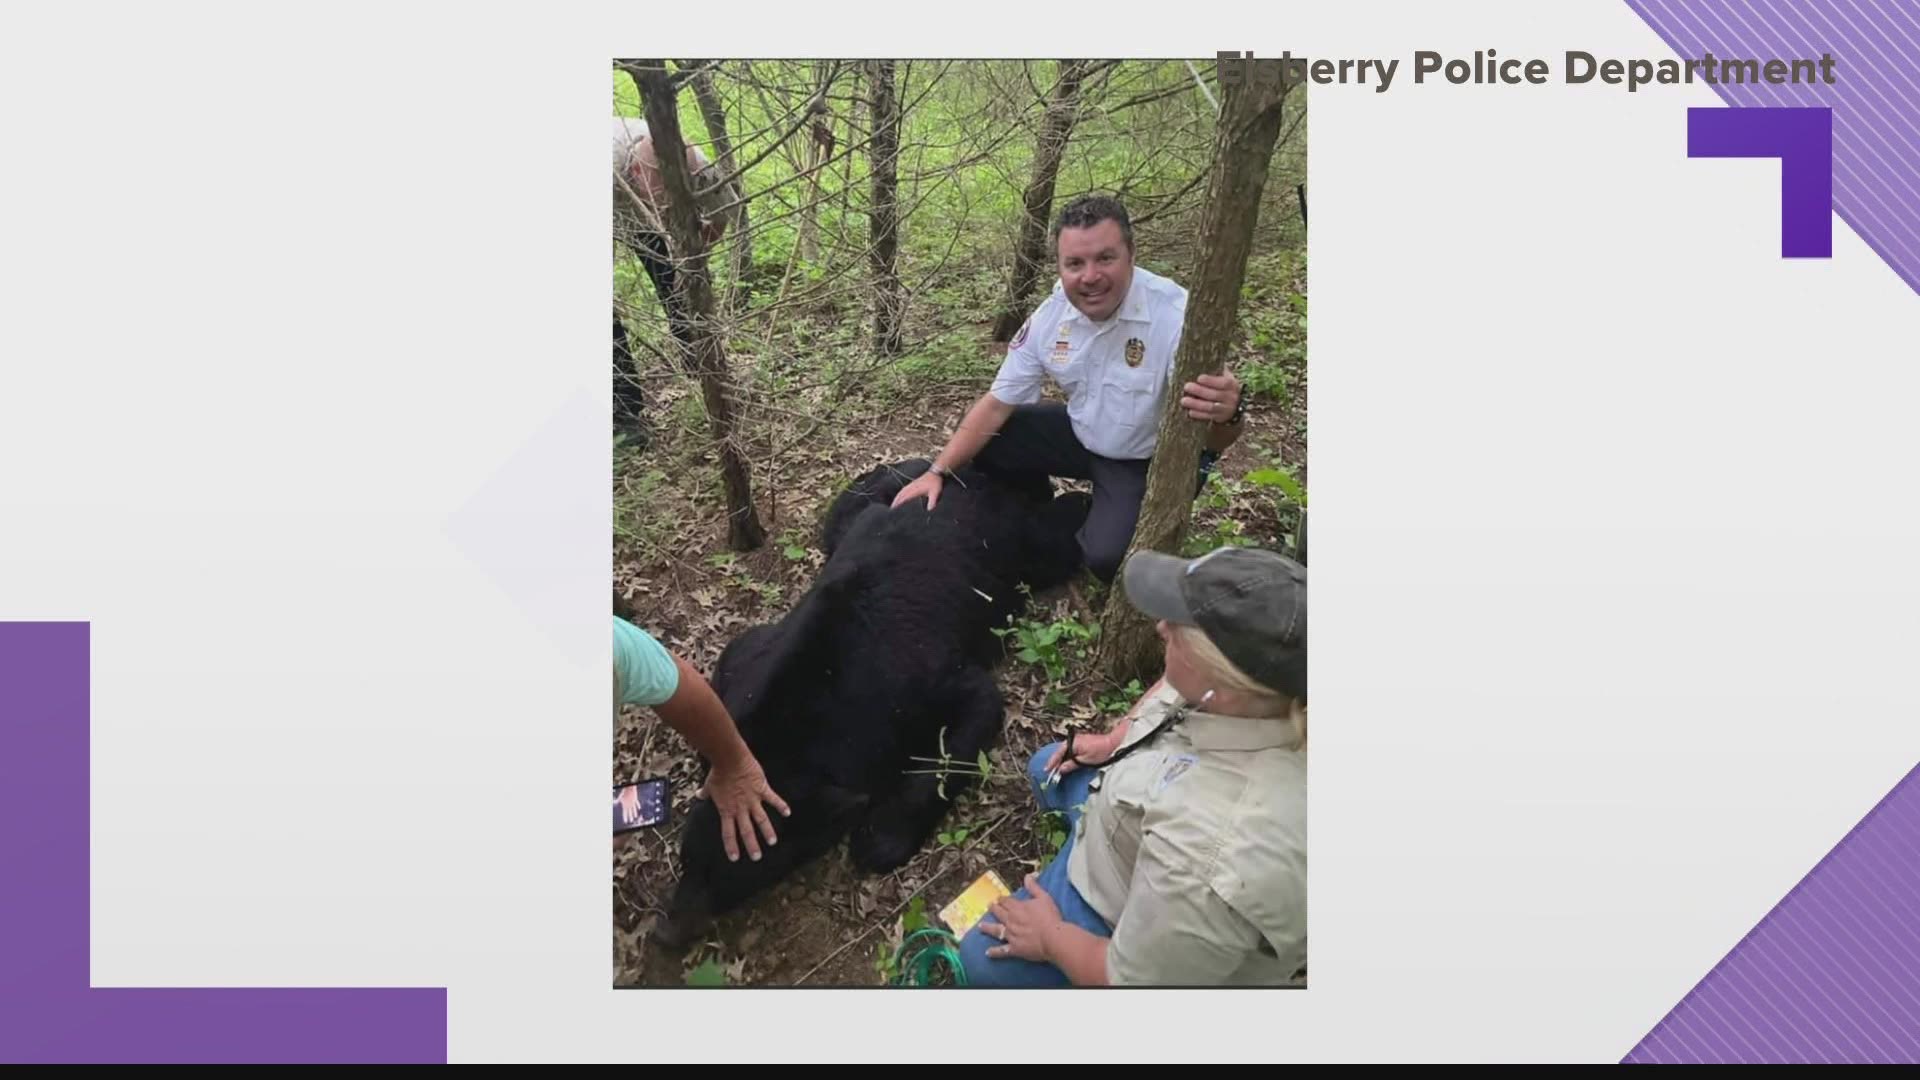 The bear, who has gained popularity online, was safely moved to a more animal-friendly area